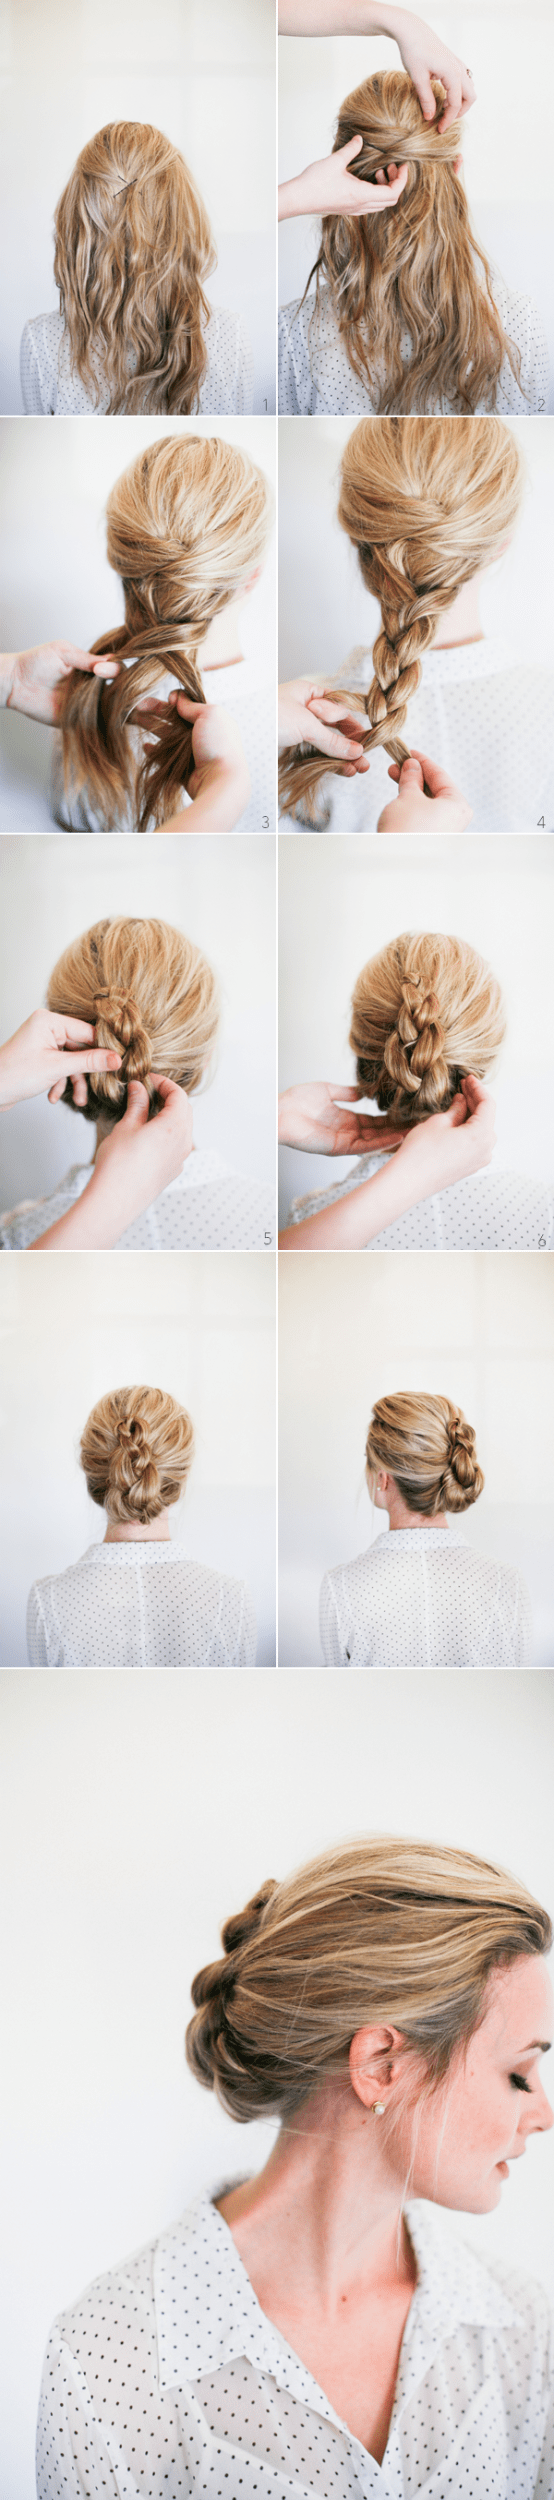 10 Of The Easiest And Fastest 3 Minutes Hairstyles For Absolutely ...